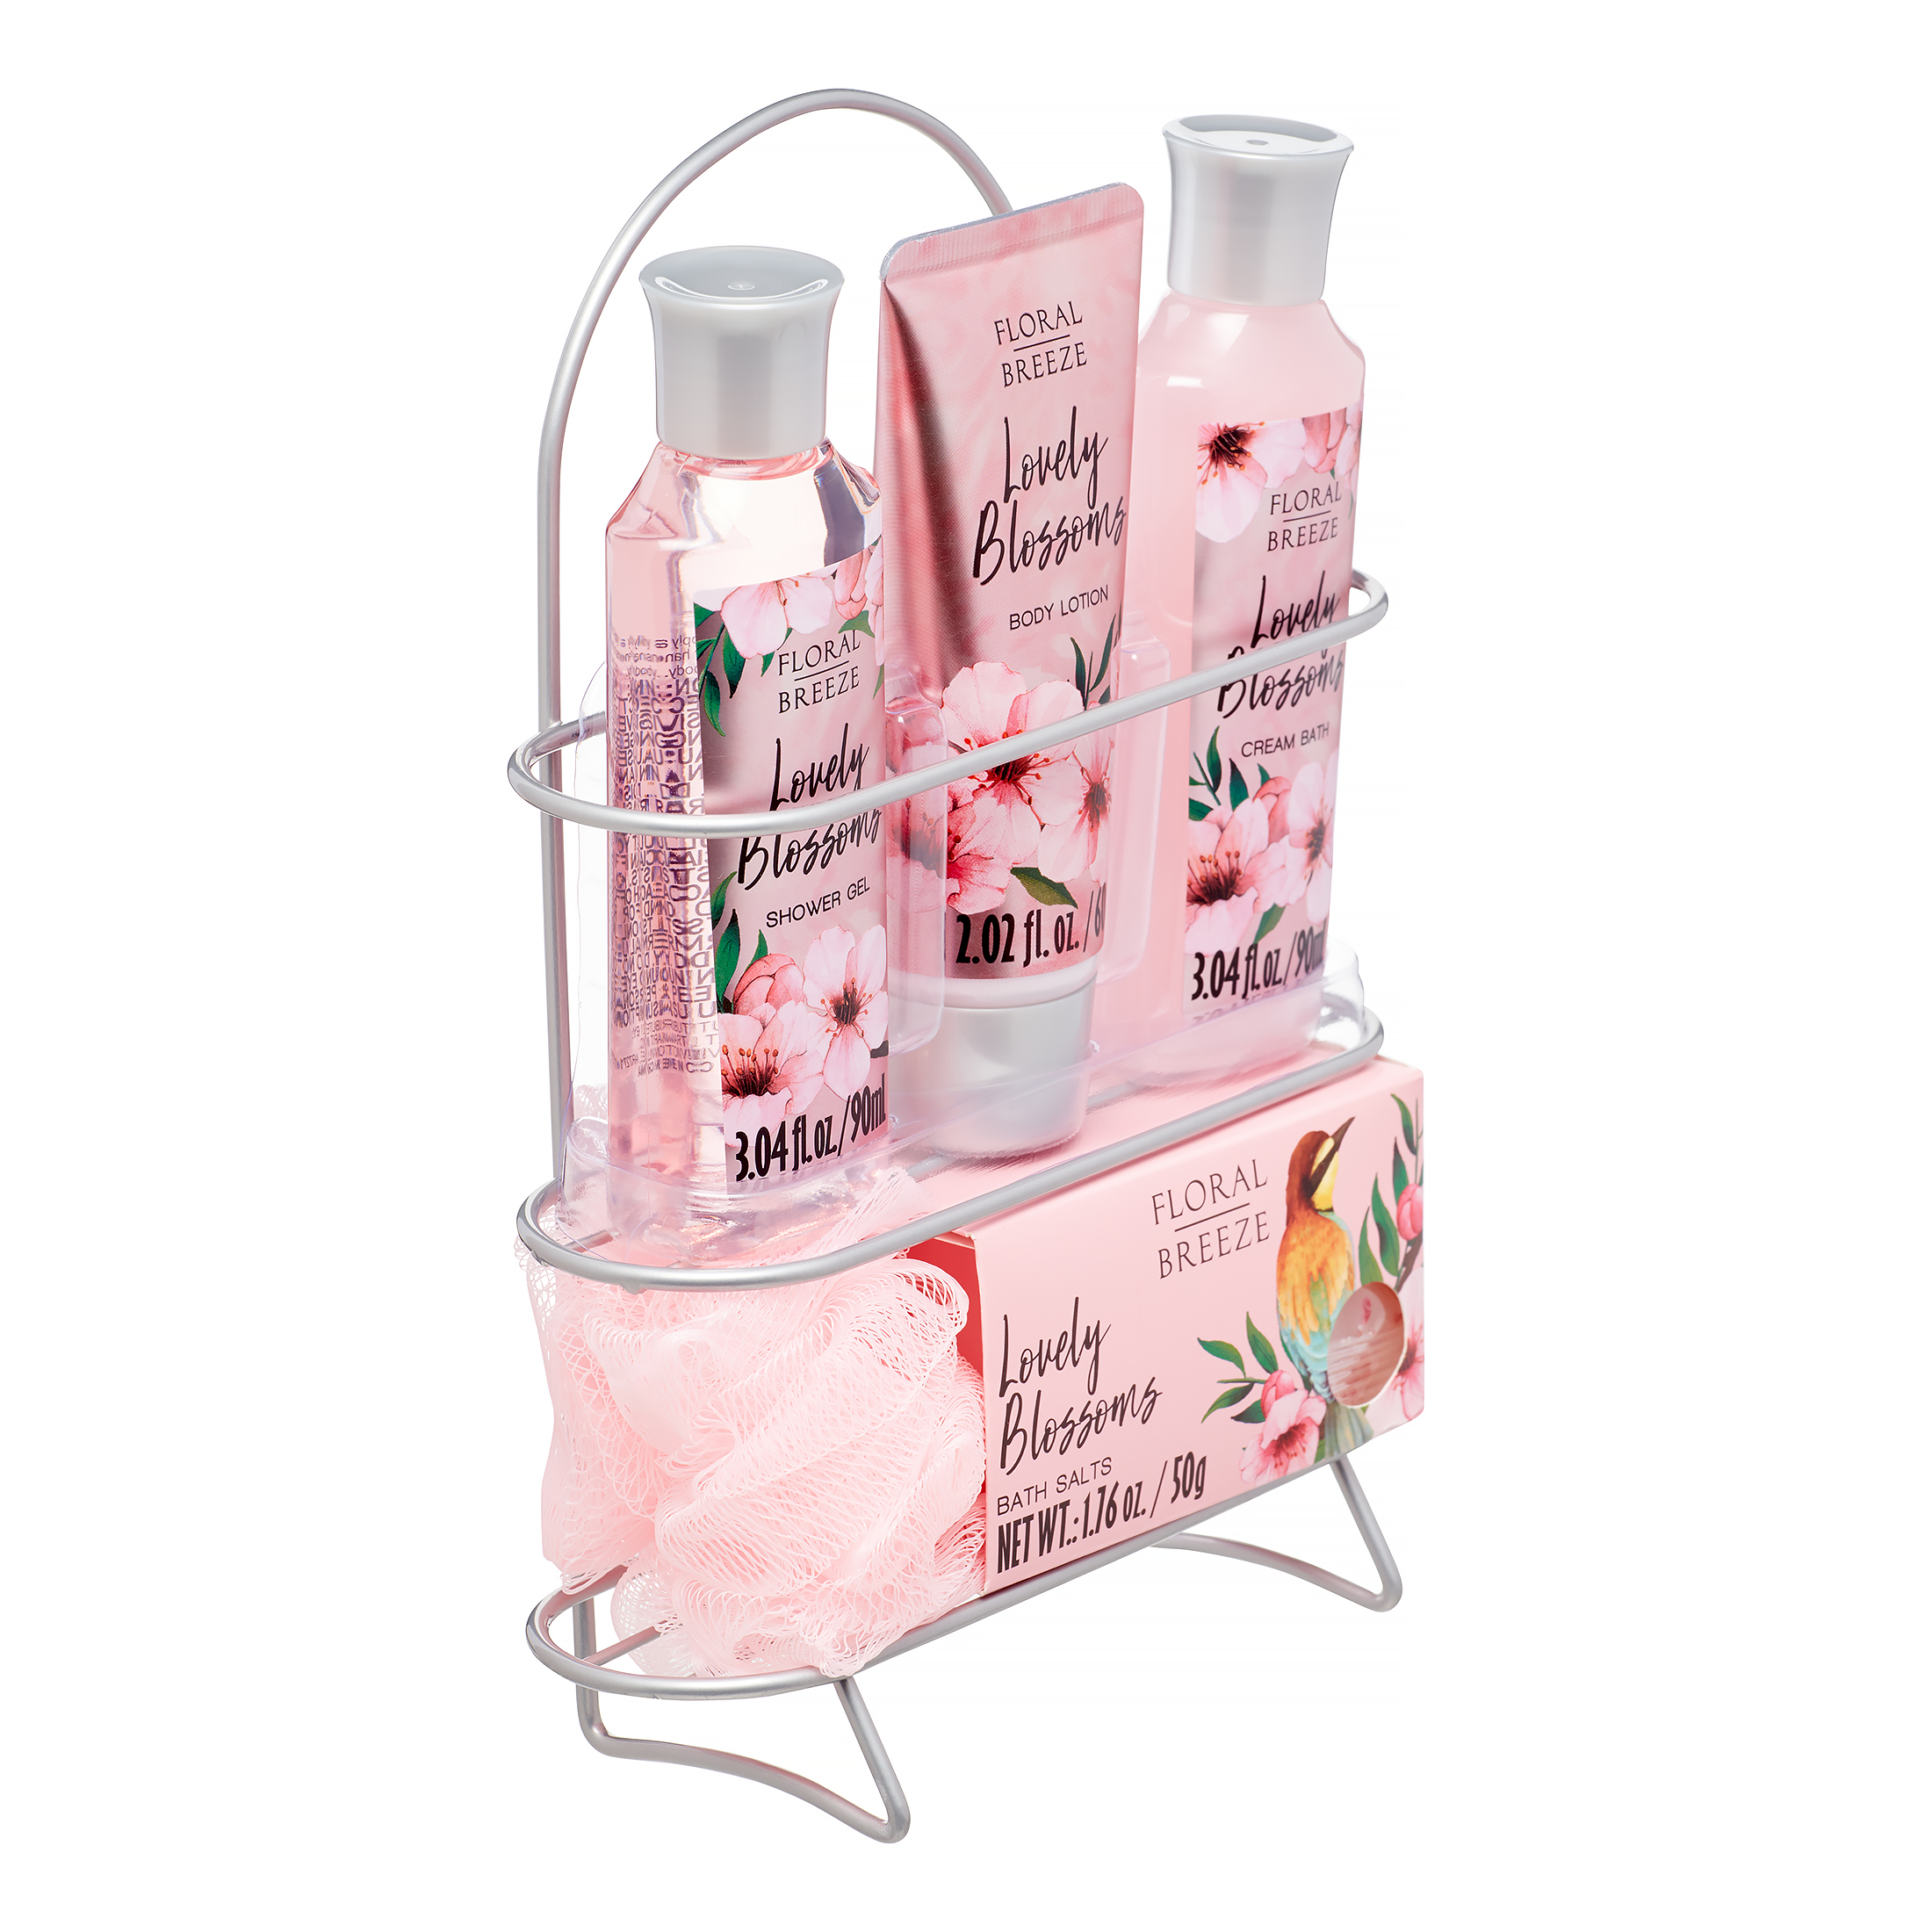 Floral Breeze 6-Piece Lovely Blossoms Bath and Body Gift Set with Shower Caddy - image 2 of 7